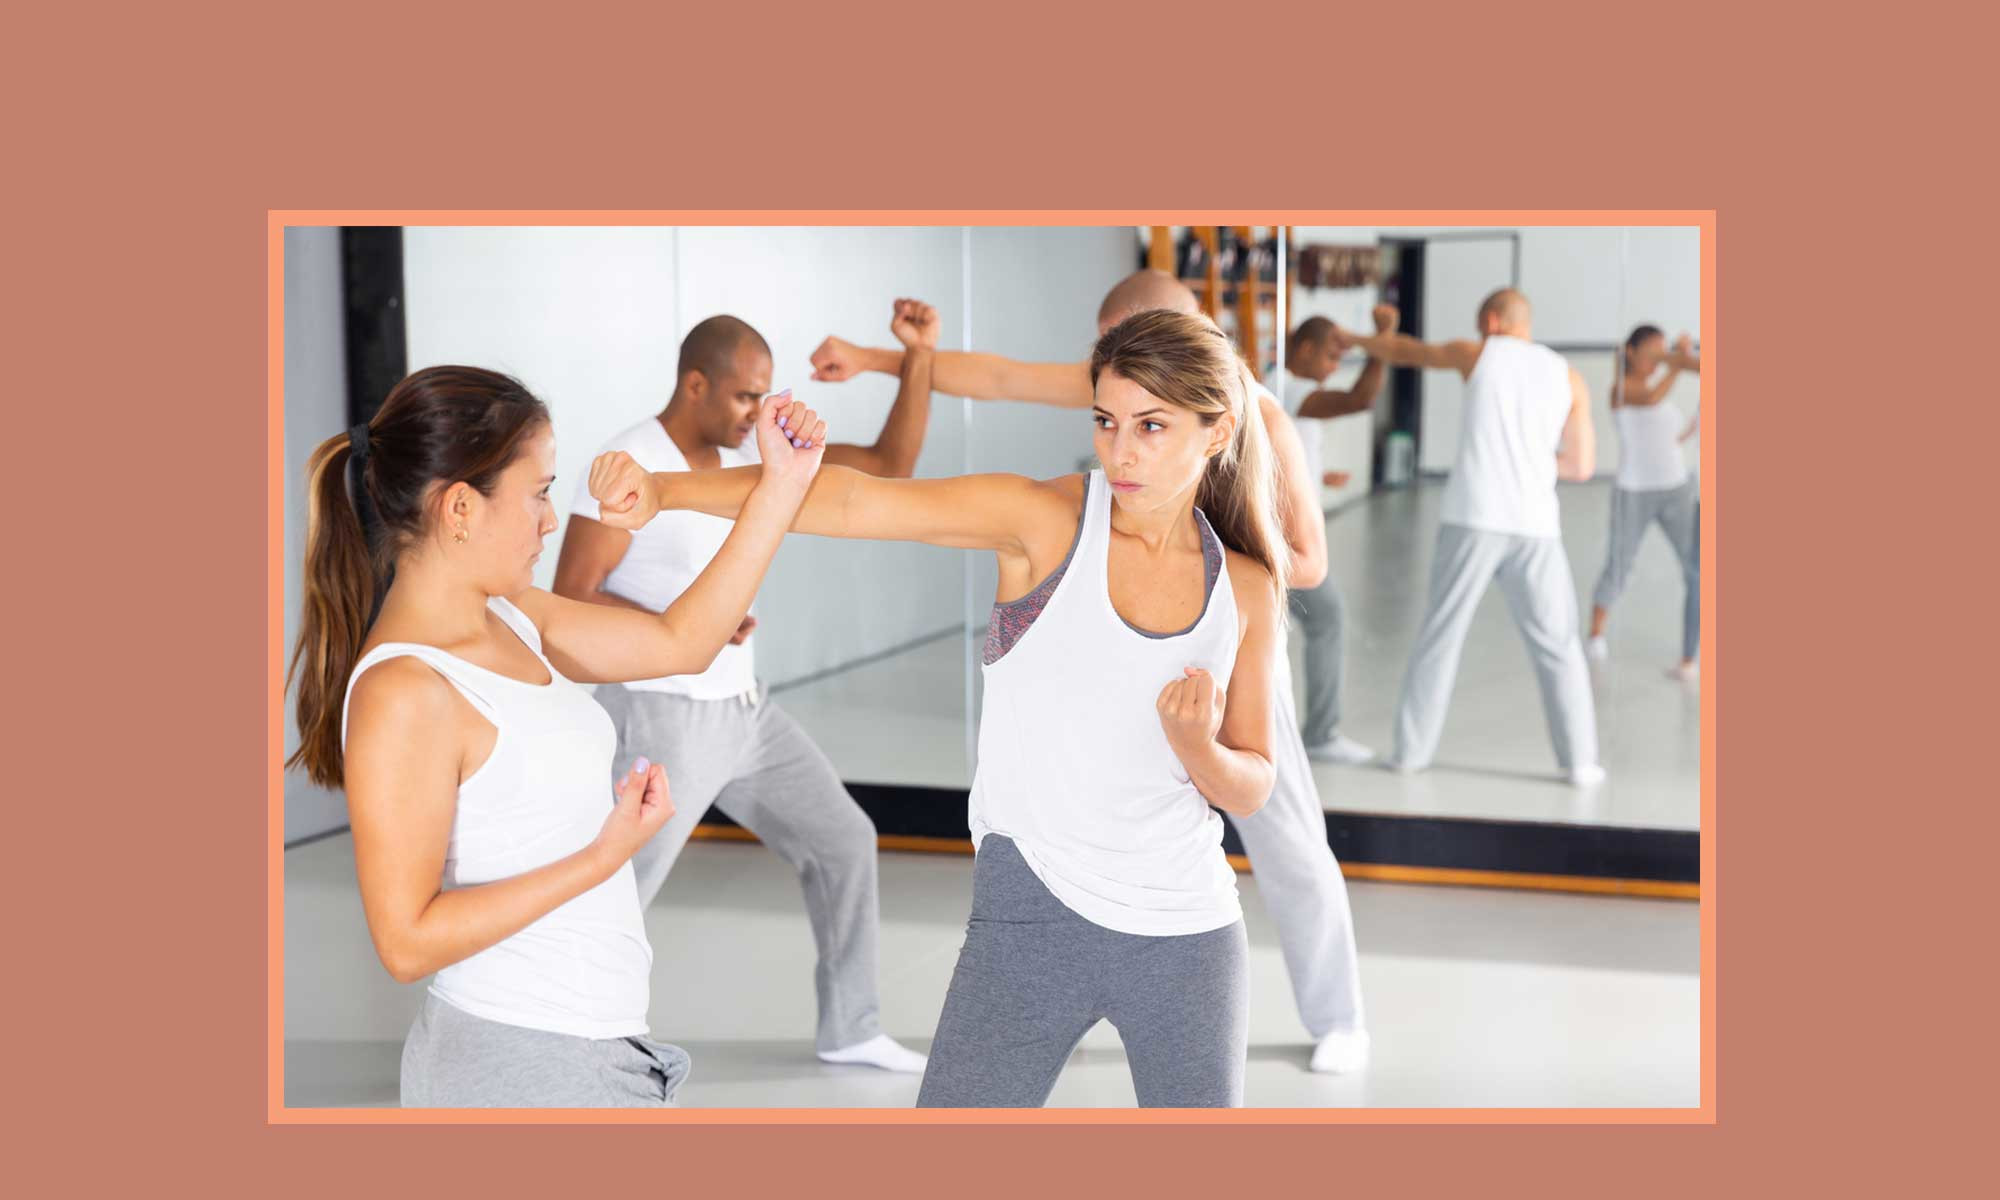 Improve Your Self Defense Skills With These Online Classes For Every Experience Level